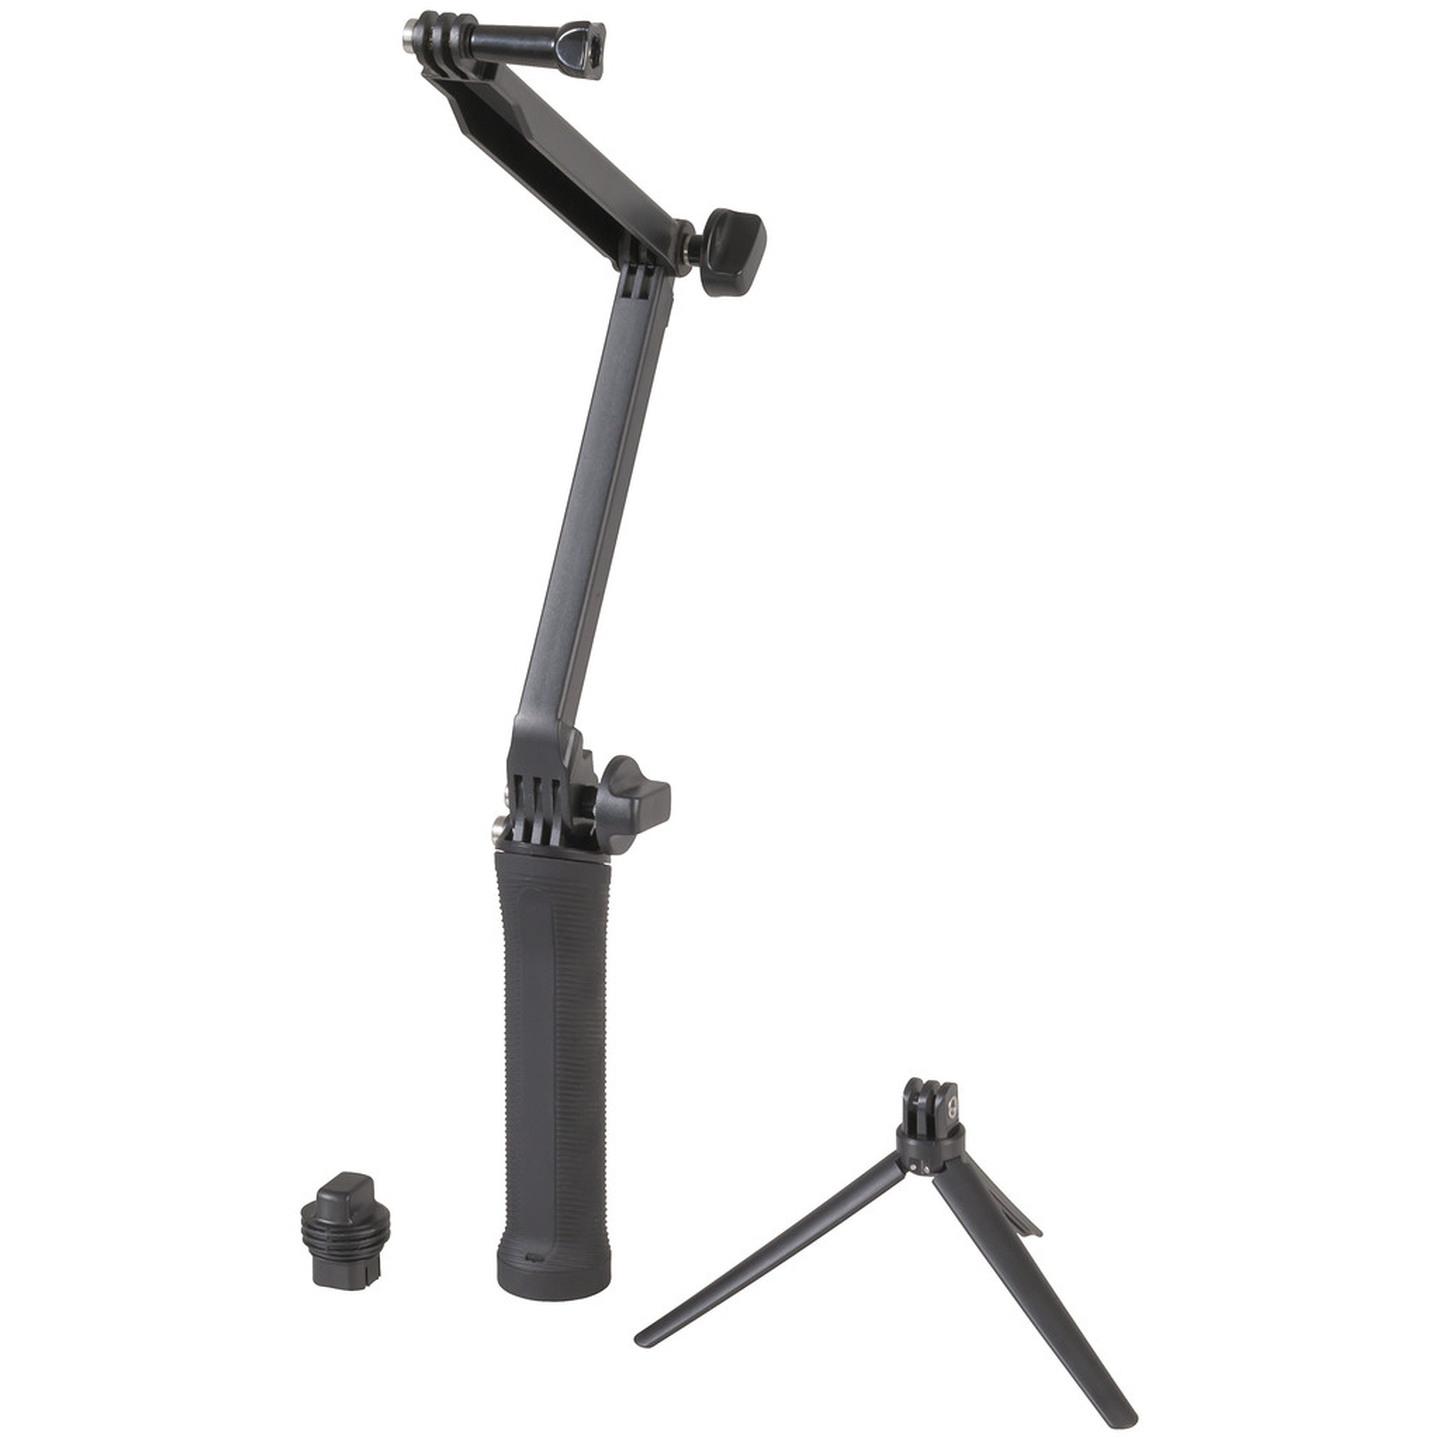 3-Way Tripod Arm for Action Cameras